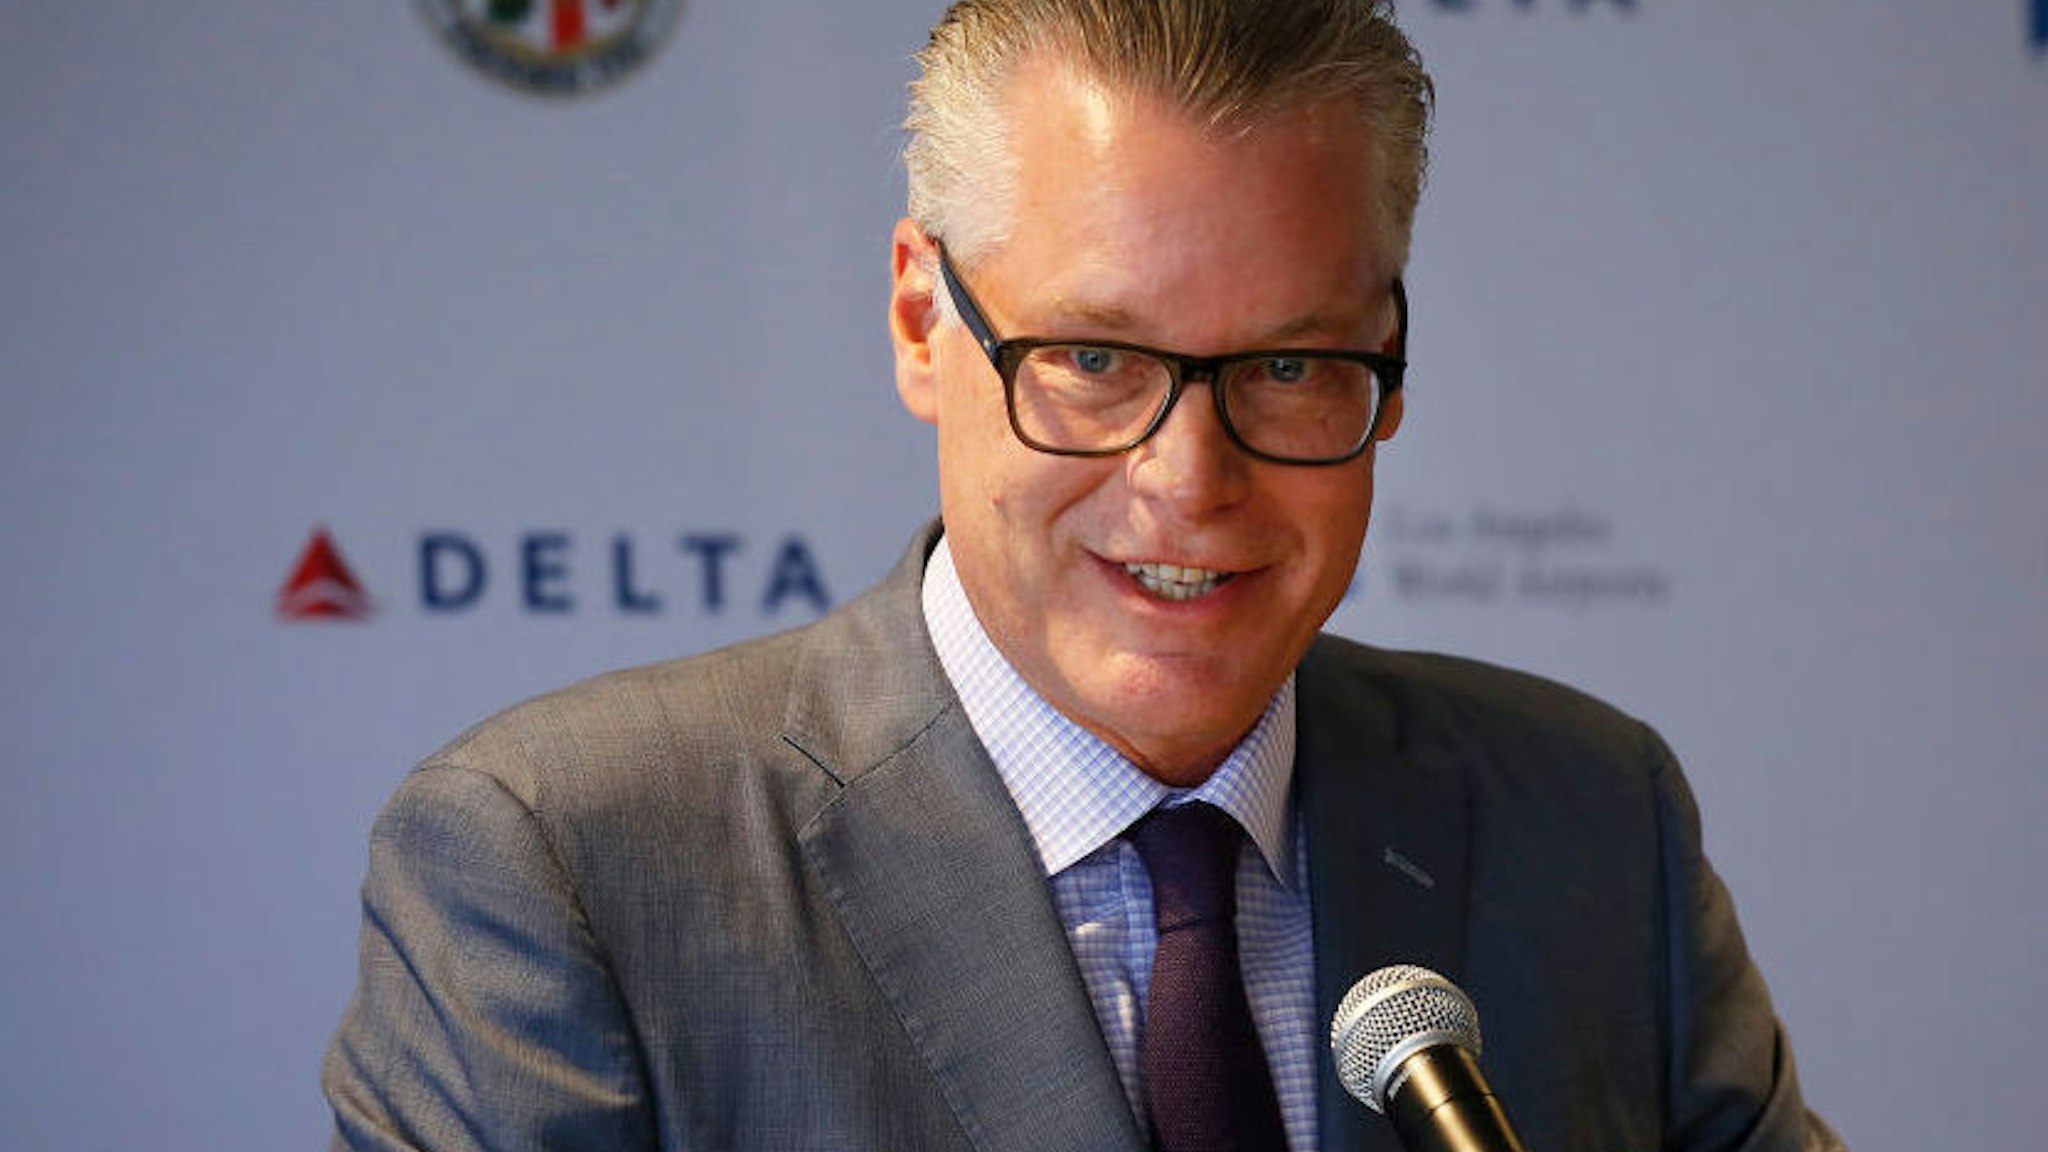 LOS ANGELES, CA â€“ May 31, 2018: Delta CEO Ed Bastian, at a press conference to announce that Delta Air Lines and Los Angeles World Airports (LAWA) have formally kicked off the Delta Sky Way at LAX project â€” Delta's $1.86 billion plan to modernize, upgrade and connect Terminals 2, 3, and the Tom Bradley International Terminal (Terminal B). Construction is expected to begin this fall. The project kick-off follows the LAWA Board of Airport Commissioners' recent approval of the largest tenant improvement award in its history, which cleared the way for the Delta Sky Way at LAX to begin. (Al Seib / Los Angeles Times)